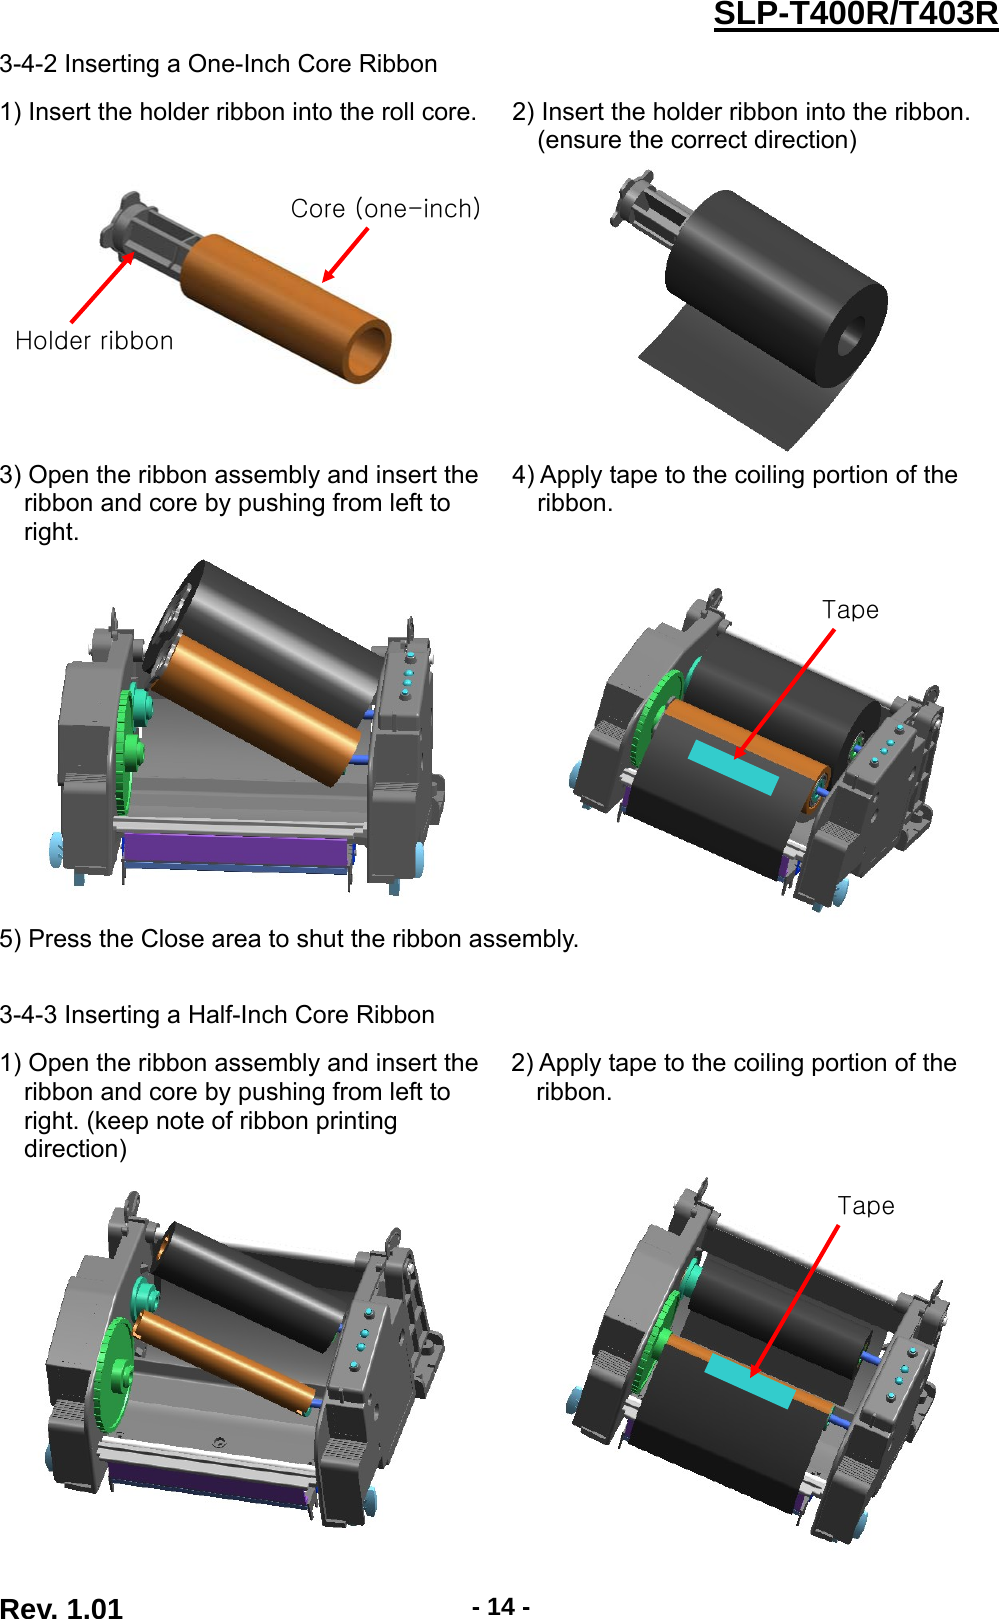  Rev. 1.01  - 14 -SLP-T400R/T403R3-4-2 Inserting a One-Inch Core Ribbon  1) Insert the holder ribbon into the roll core.  2) Insert the holder ribbon into the ribbon. (ensure the correct direction)    3) Open the ribbon assembly and insert the ribbon and core by pushing from left to right. 4) Apply tape to the coiling portion of the ribbon.    5) Press the Close area to shut the ribbon assembly.   3-4-3 Inserting a Half-Inch Core Ribbon  1) Open the ribbon assembly and insert the ribbon and core by pushing from left to right. (keep note of ribbon printing direction) 2) Apply tape to the coiling portion of the ribbon.   Tape Tape Core (one-inch)Holder ribbon 